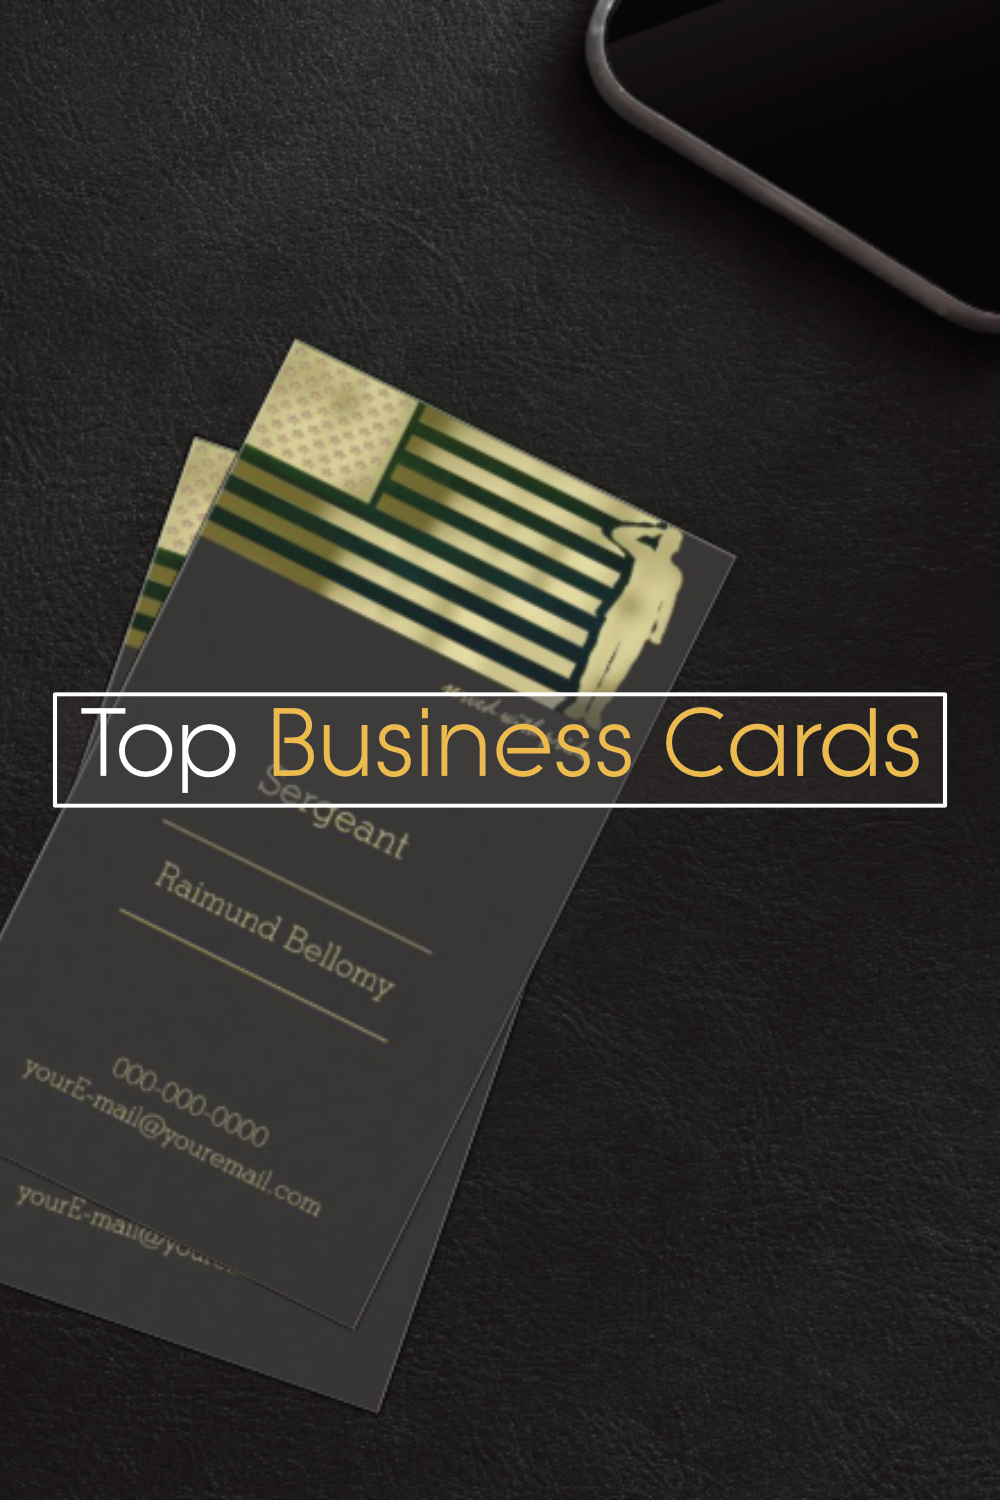 Top Business Cards